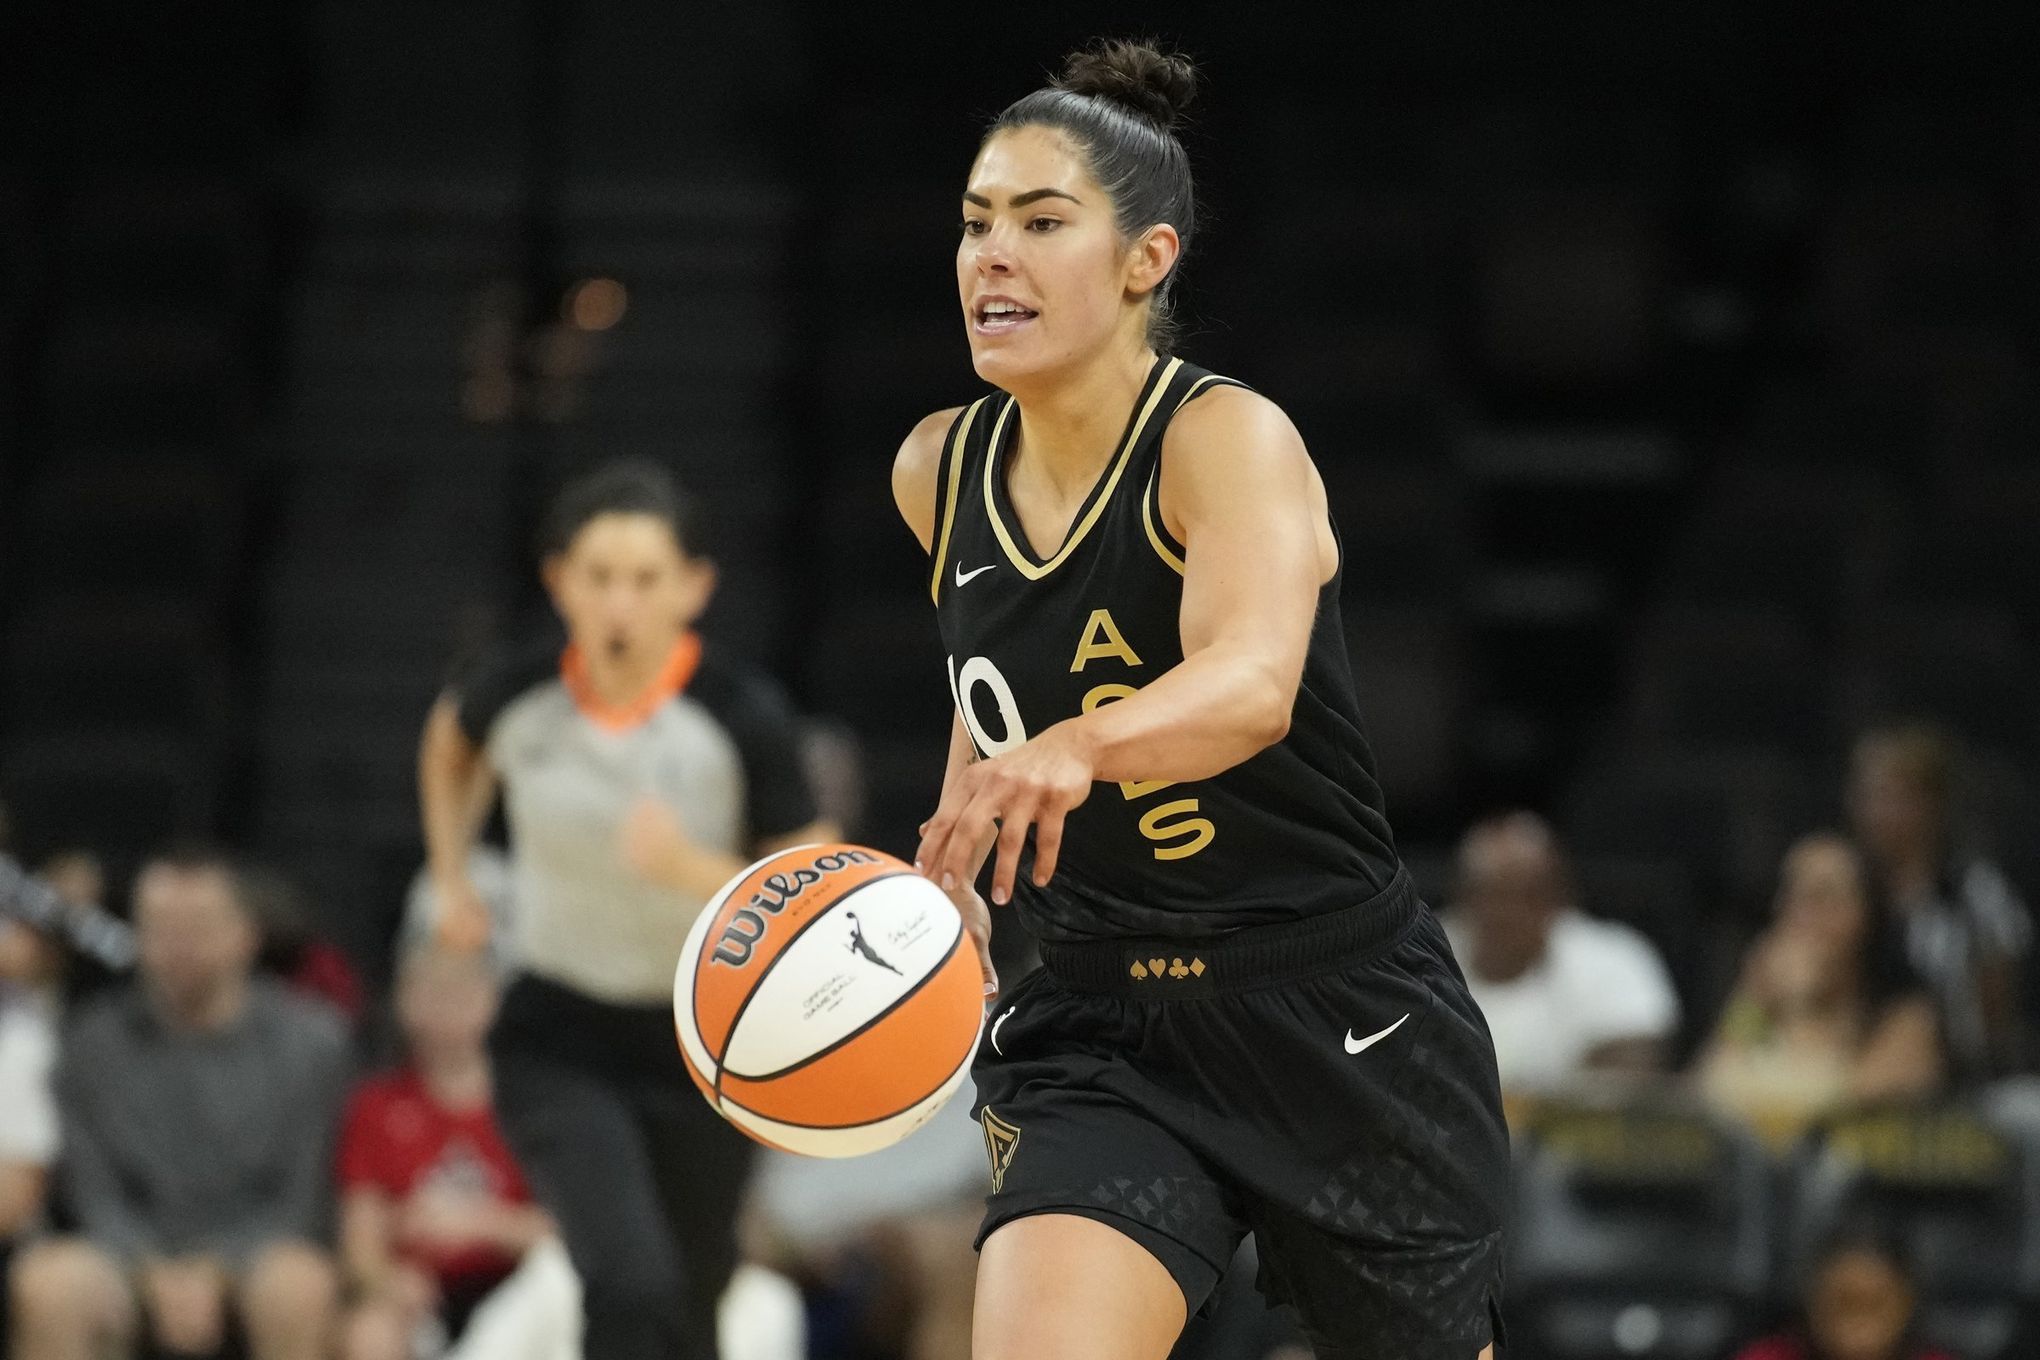 Aces, Kelsey Plum beat Chicago Sky for WNBA-record 30th win, Aces